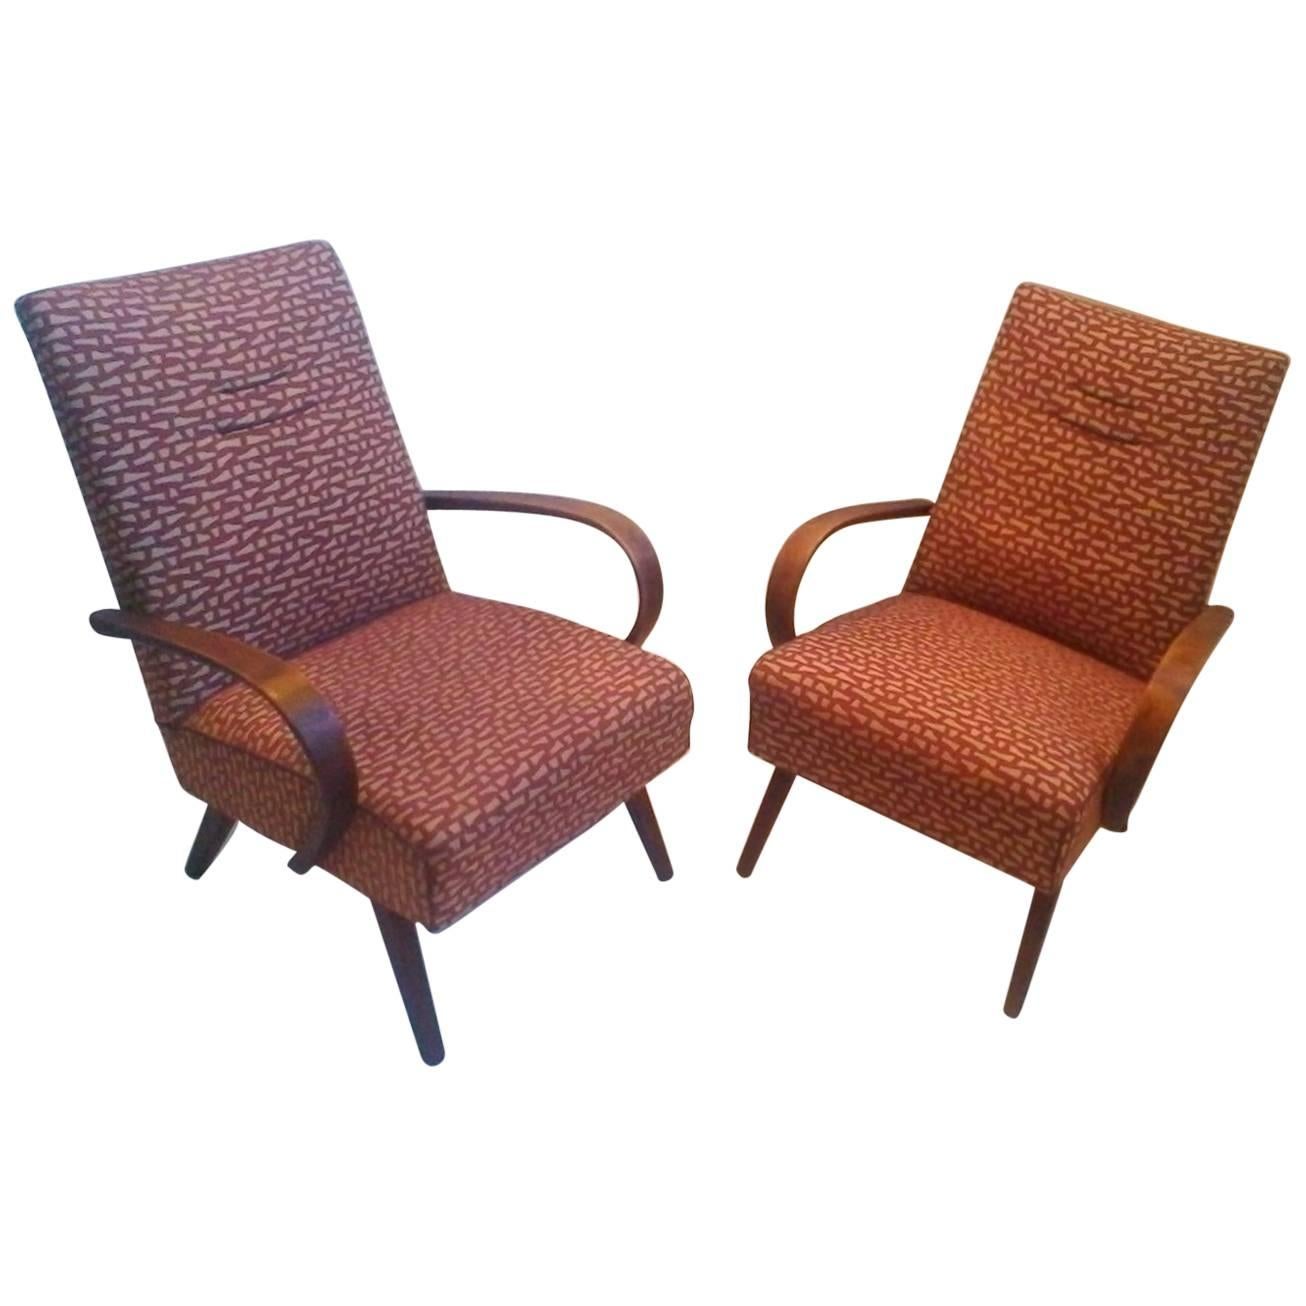 1960 Pair of Thon/Thonet Bentwood Lounge Chairs